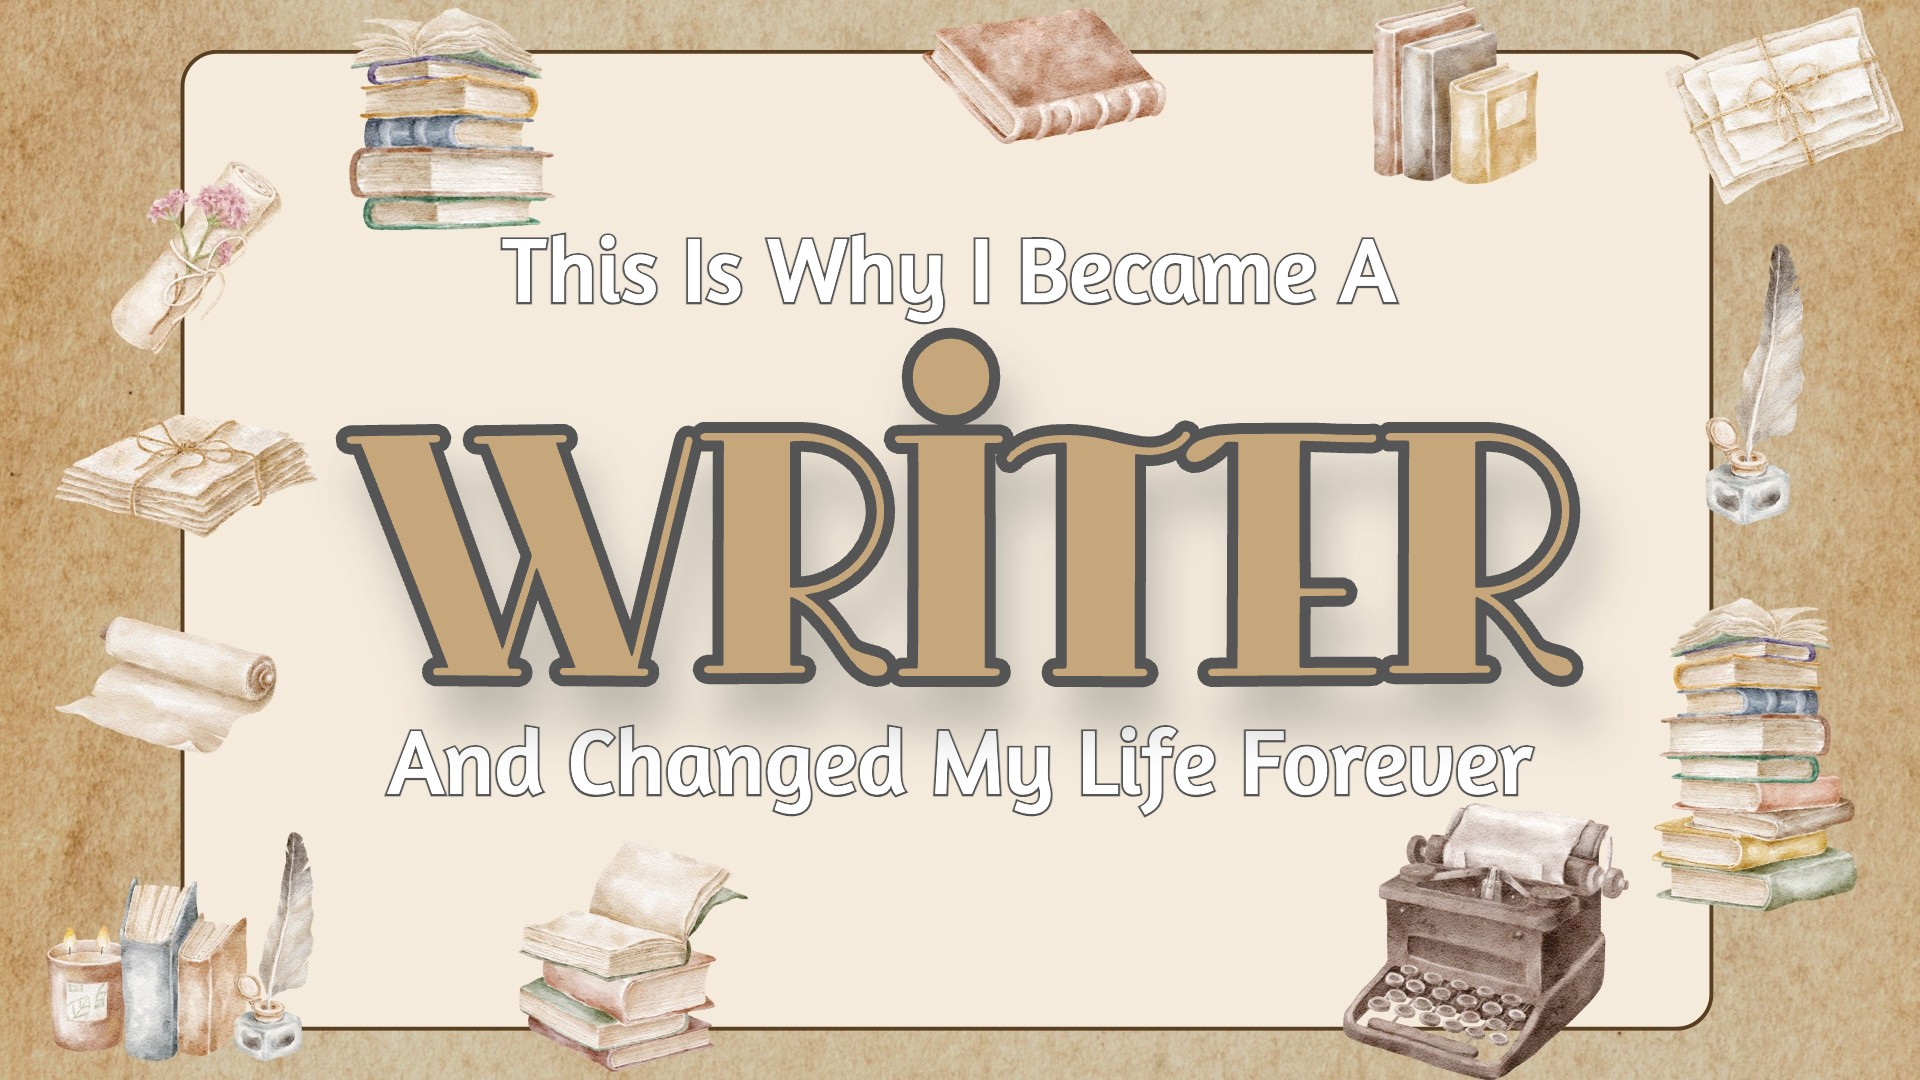 This is Why I Became a Writer and Changed My Life Forever